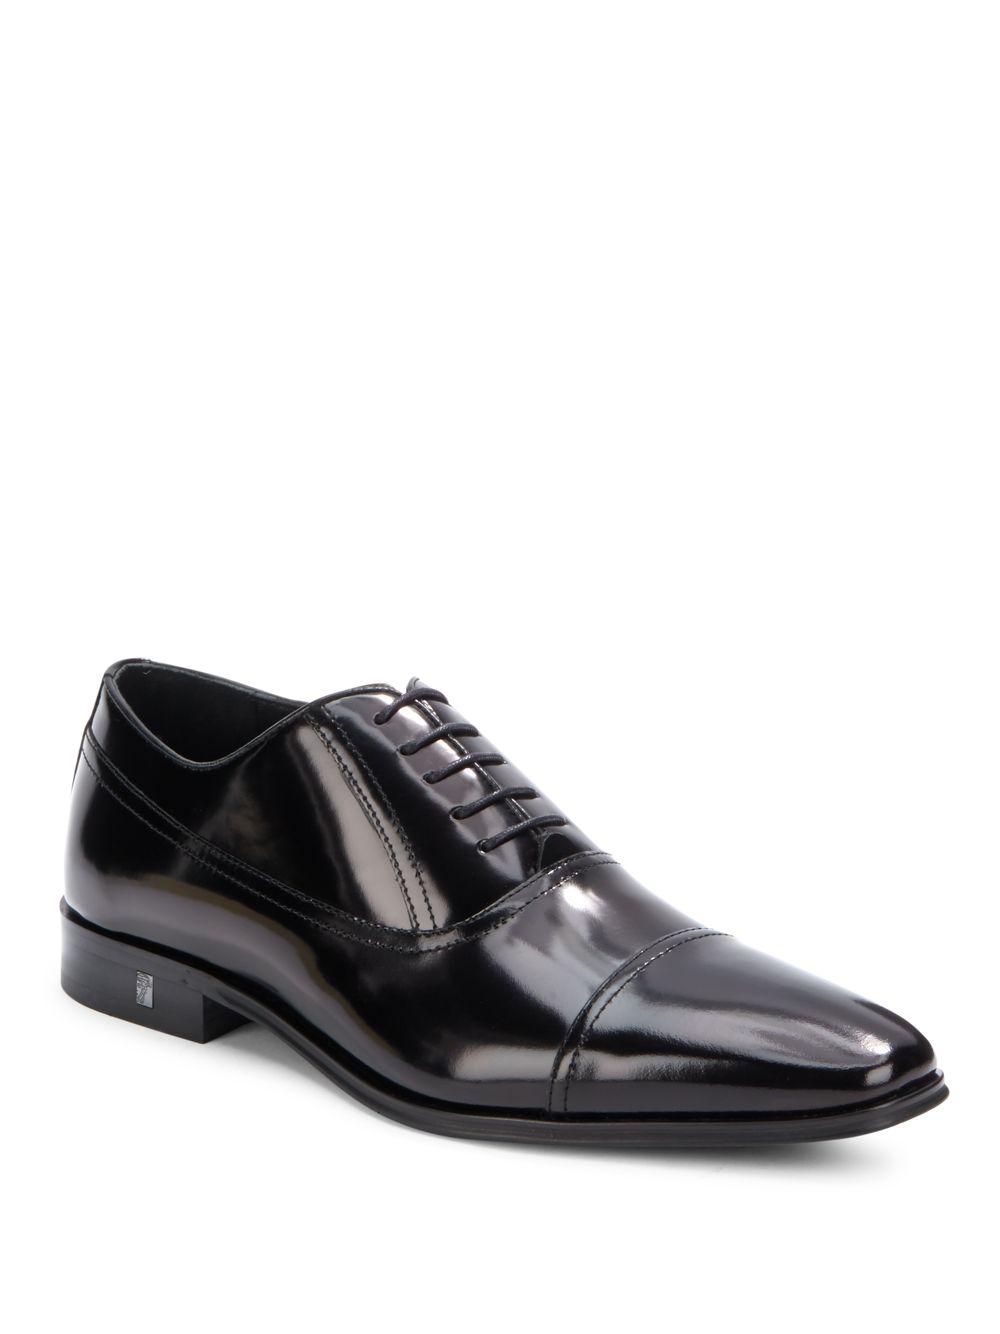 Versace Lace-up Leather Dress Shoes in Black for Men - Lyst